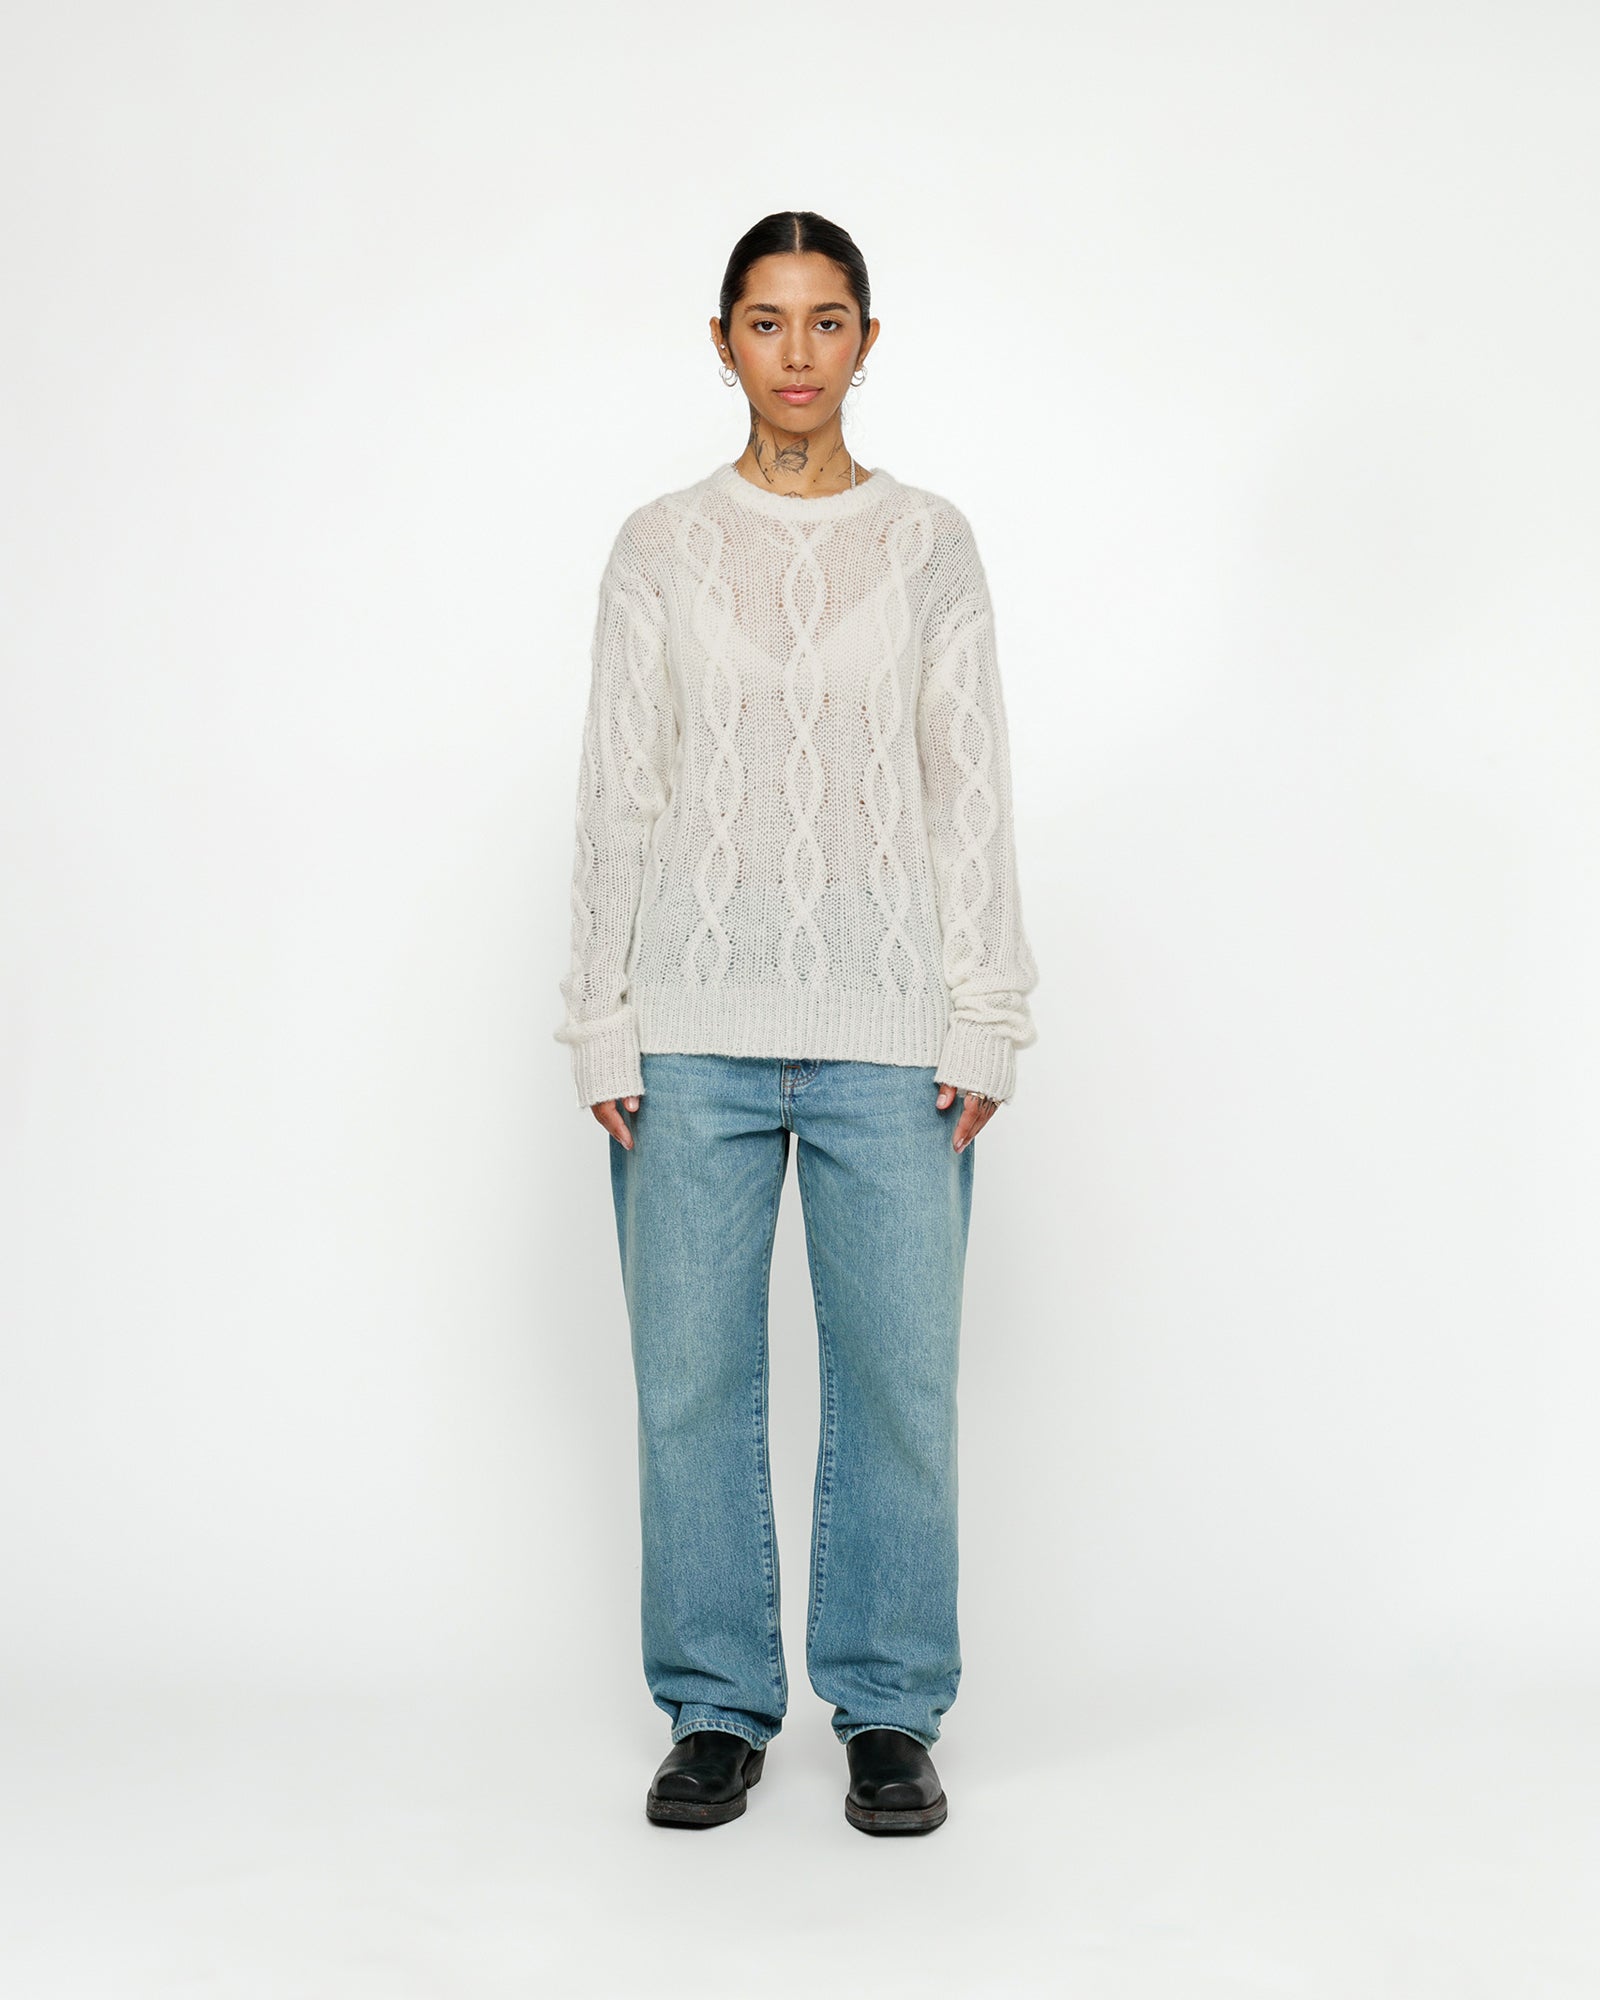 STUSSY CABLE LOOSE KNIT SWEATER IVORY KNIT